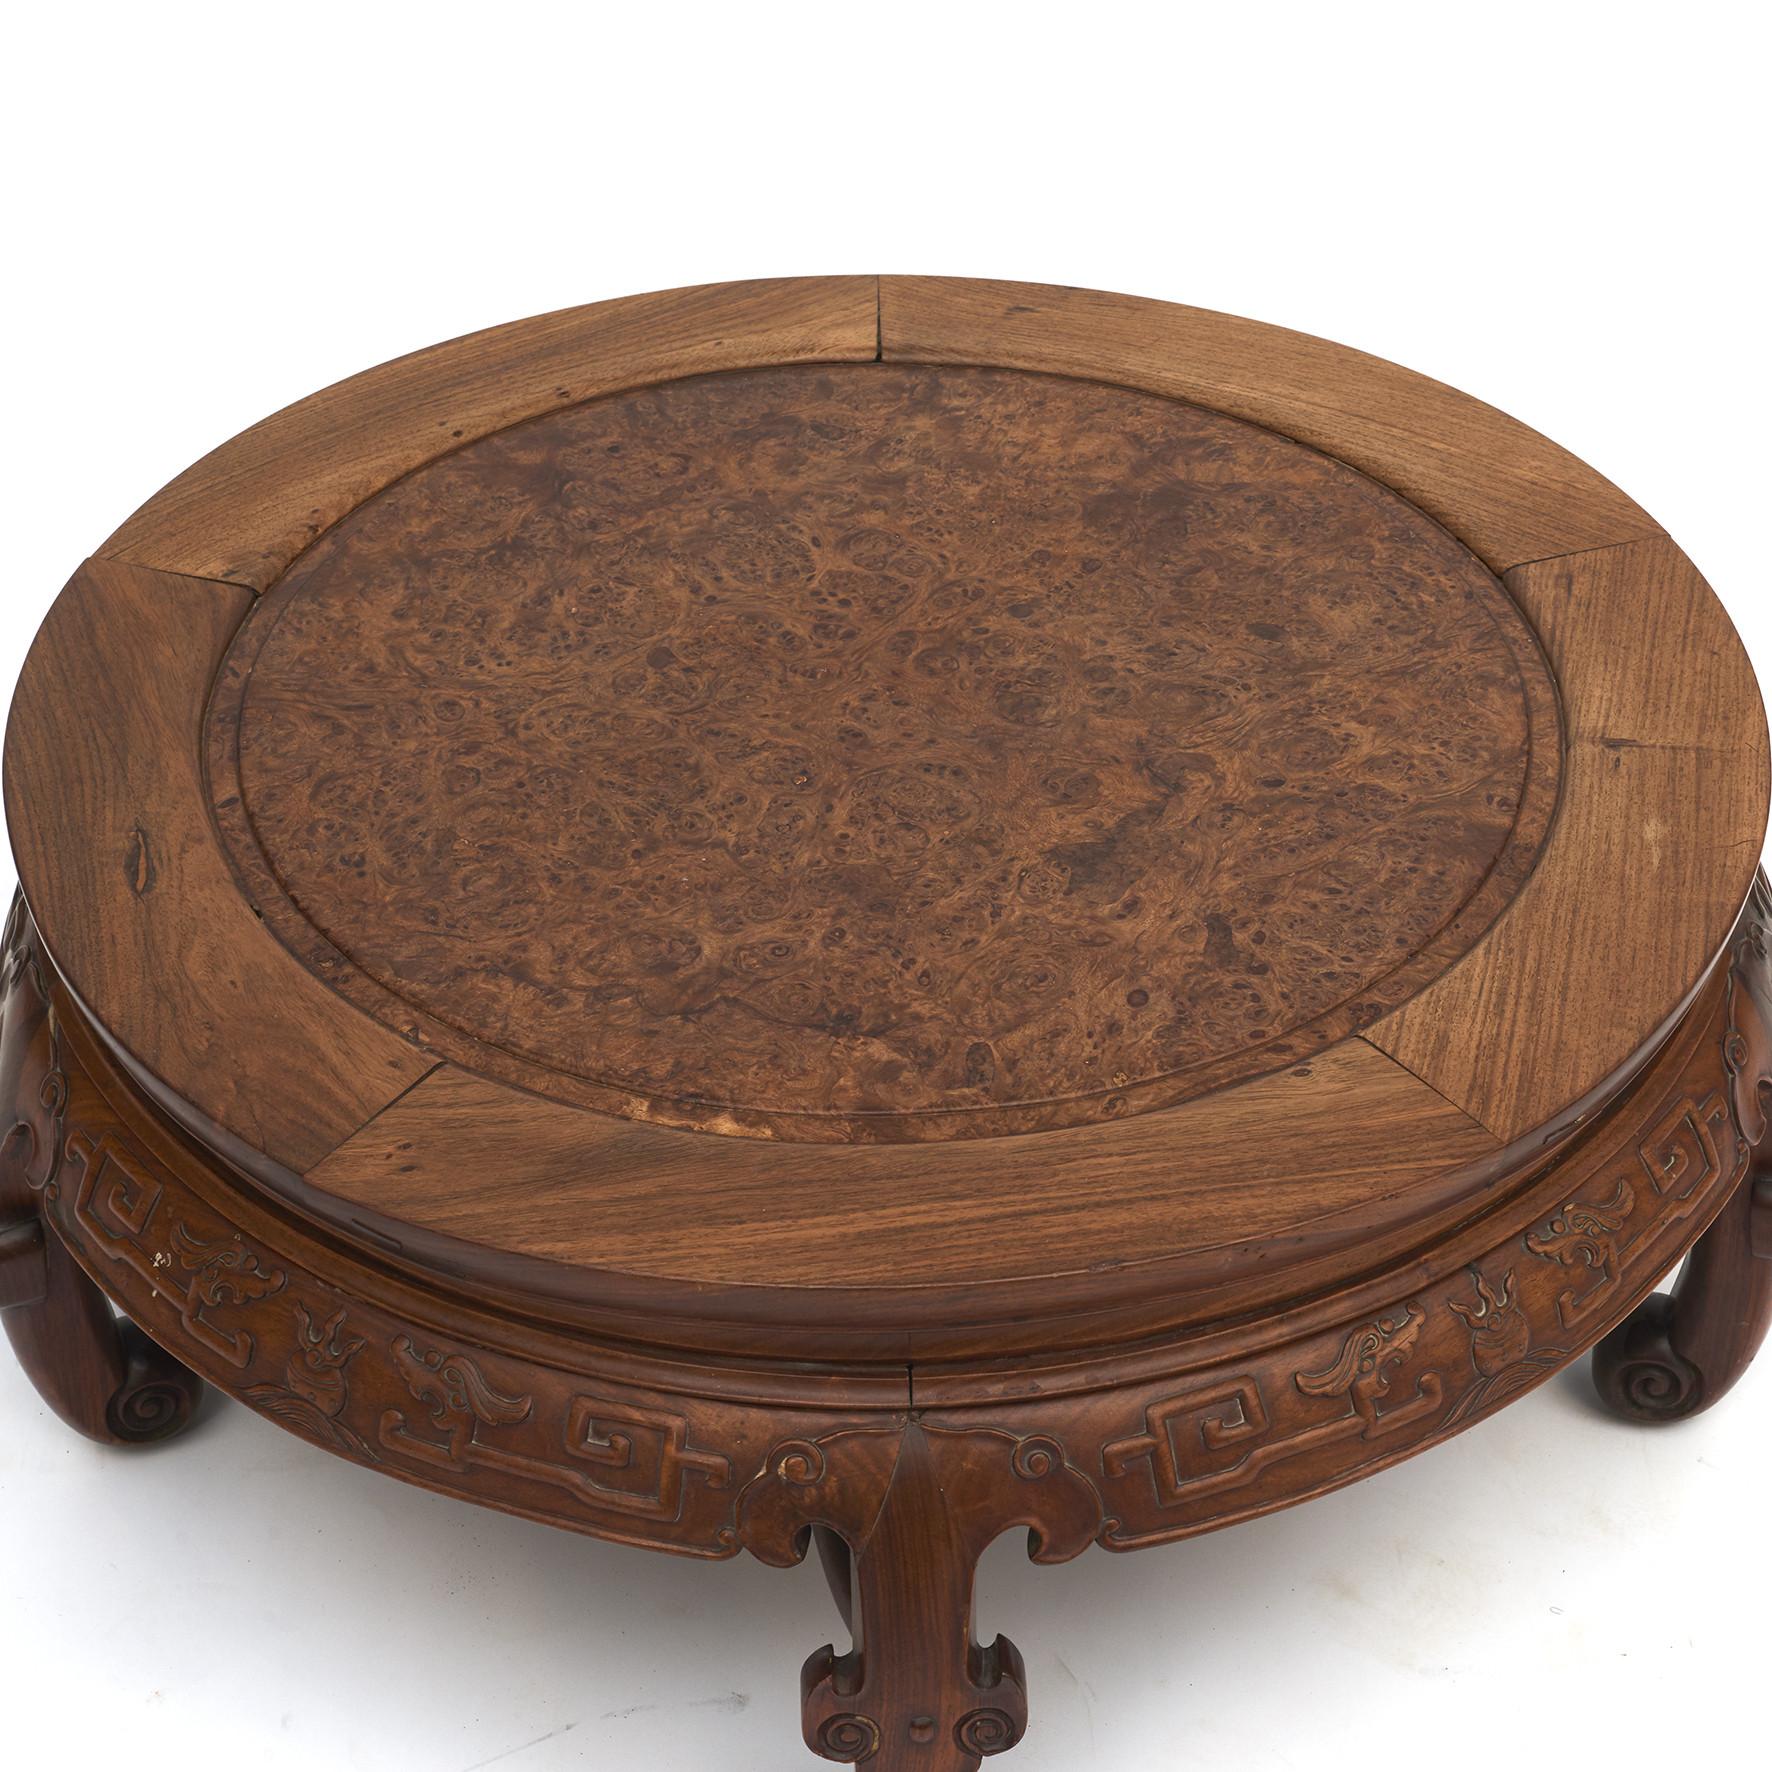 Chinese Qing style Kang table with circular paneled top over a carved apron enriched with relief dragons.
Table top with blackwood frame and root wood panel.
5 C-curved legs with stretcher terminating in scroll-form feet.
Qing style, China, circa